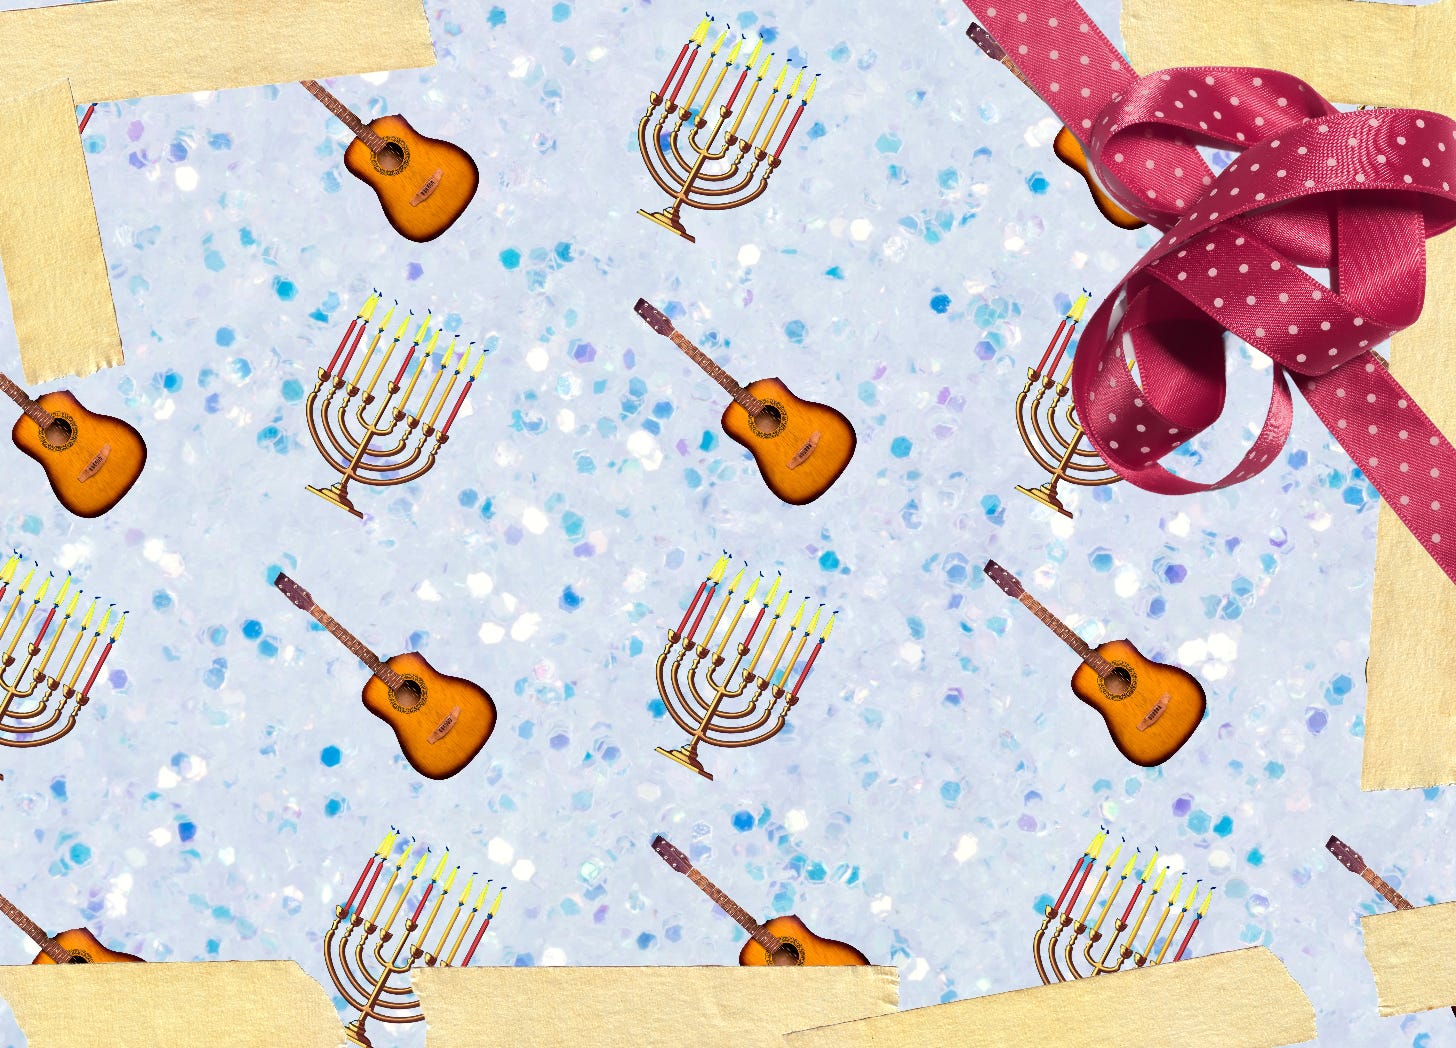 messily decorated Hanukkah package designed by Sam Zee and Adobe 